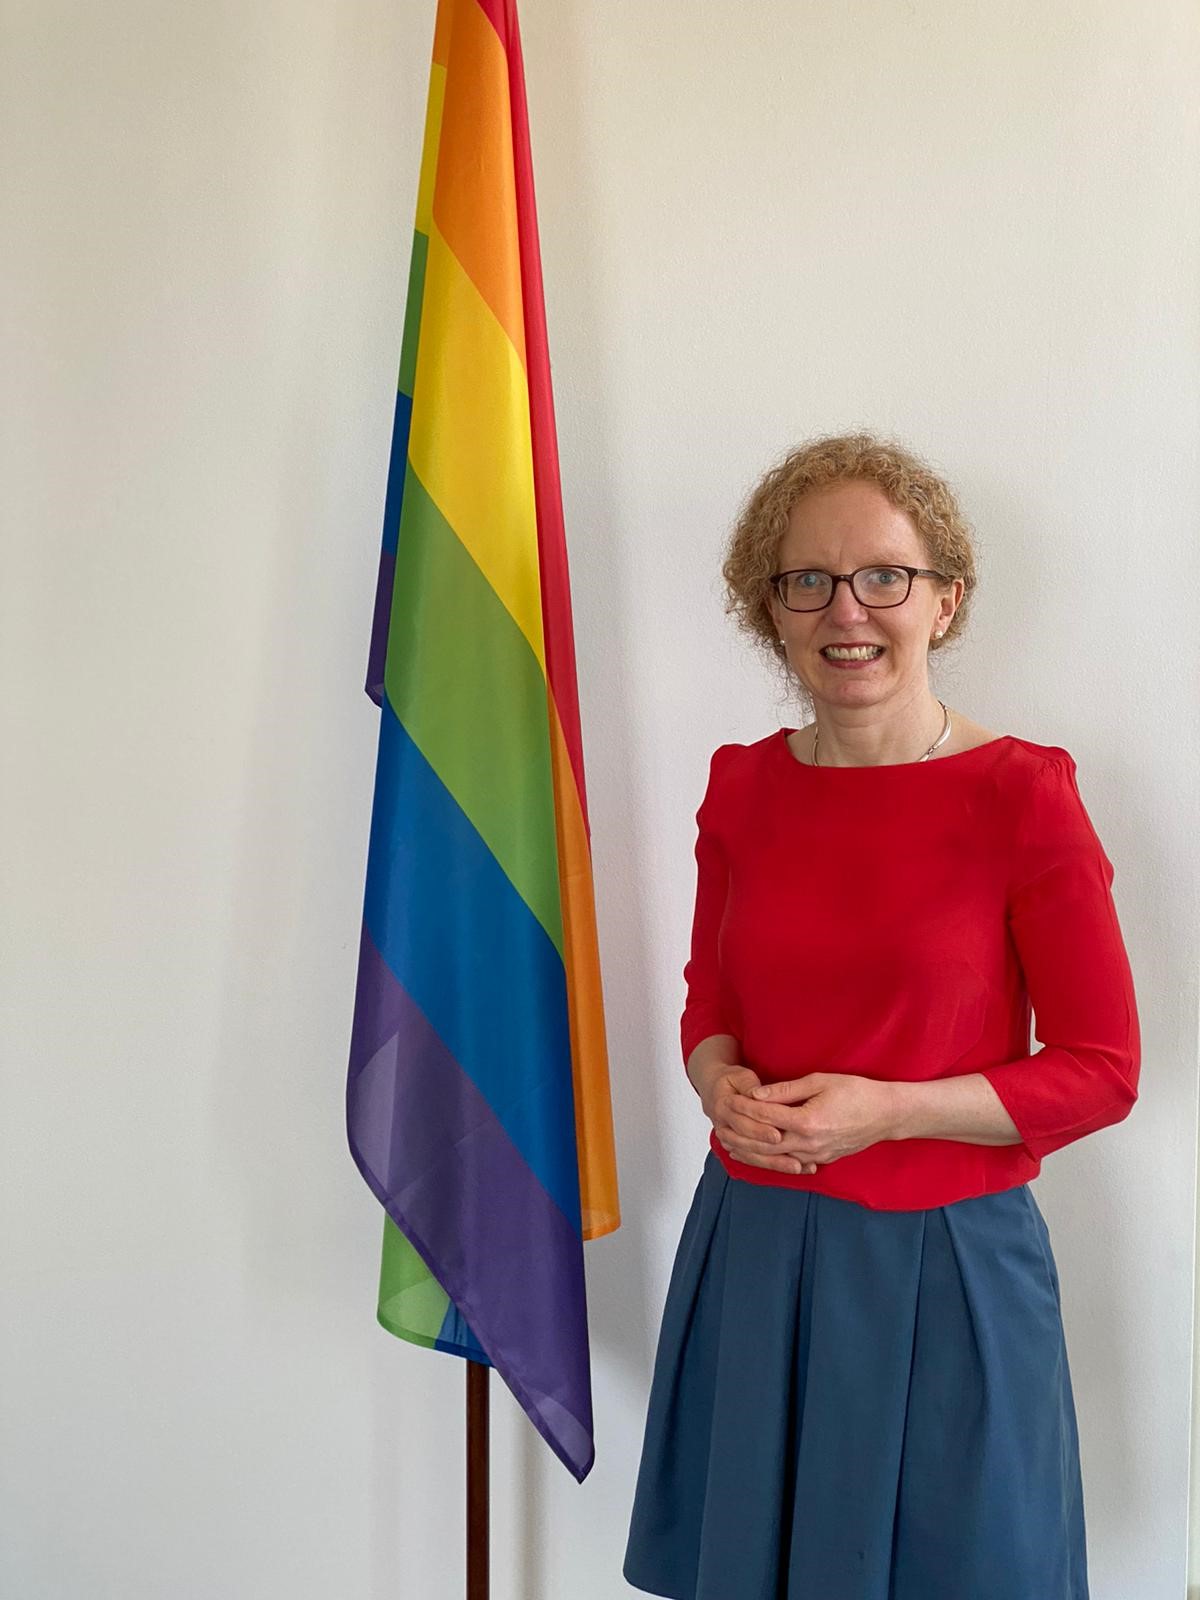 Ambassador signs open letter to mark International Day Against Homophobia, Transphobia and Biphobia